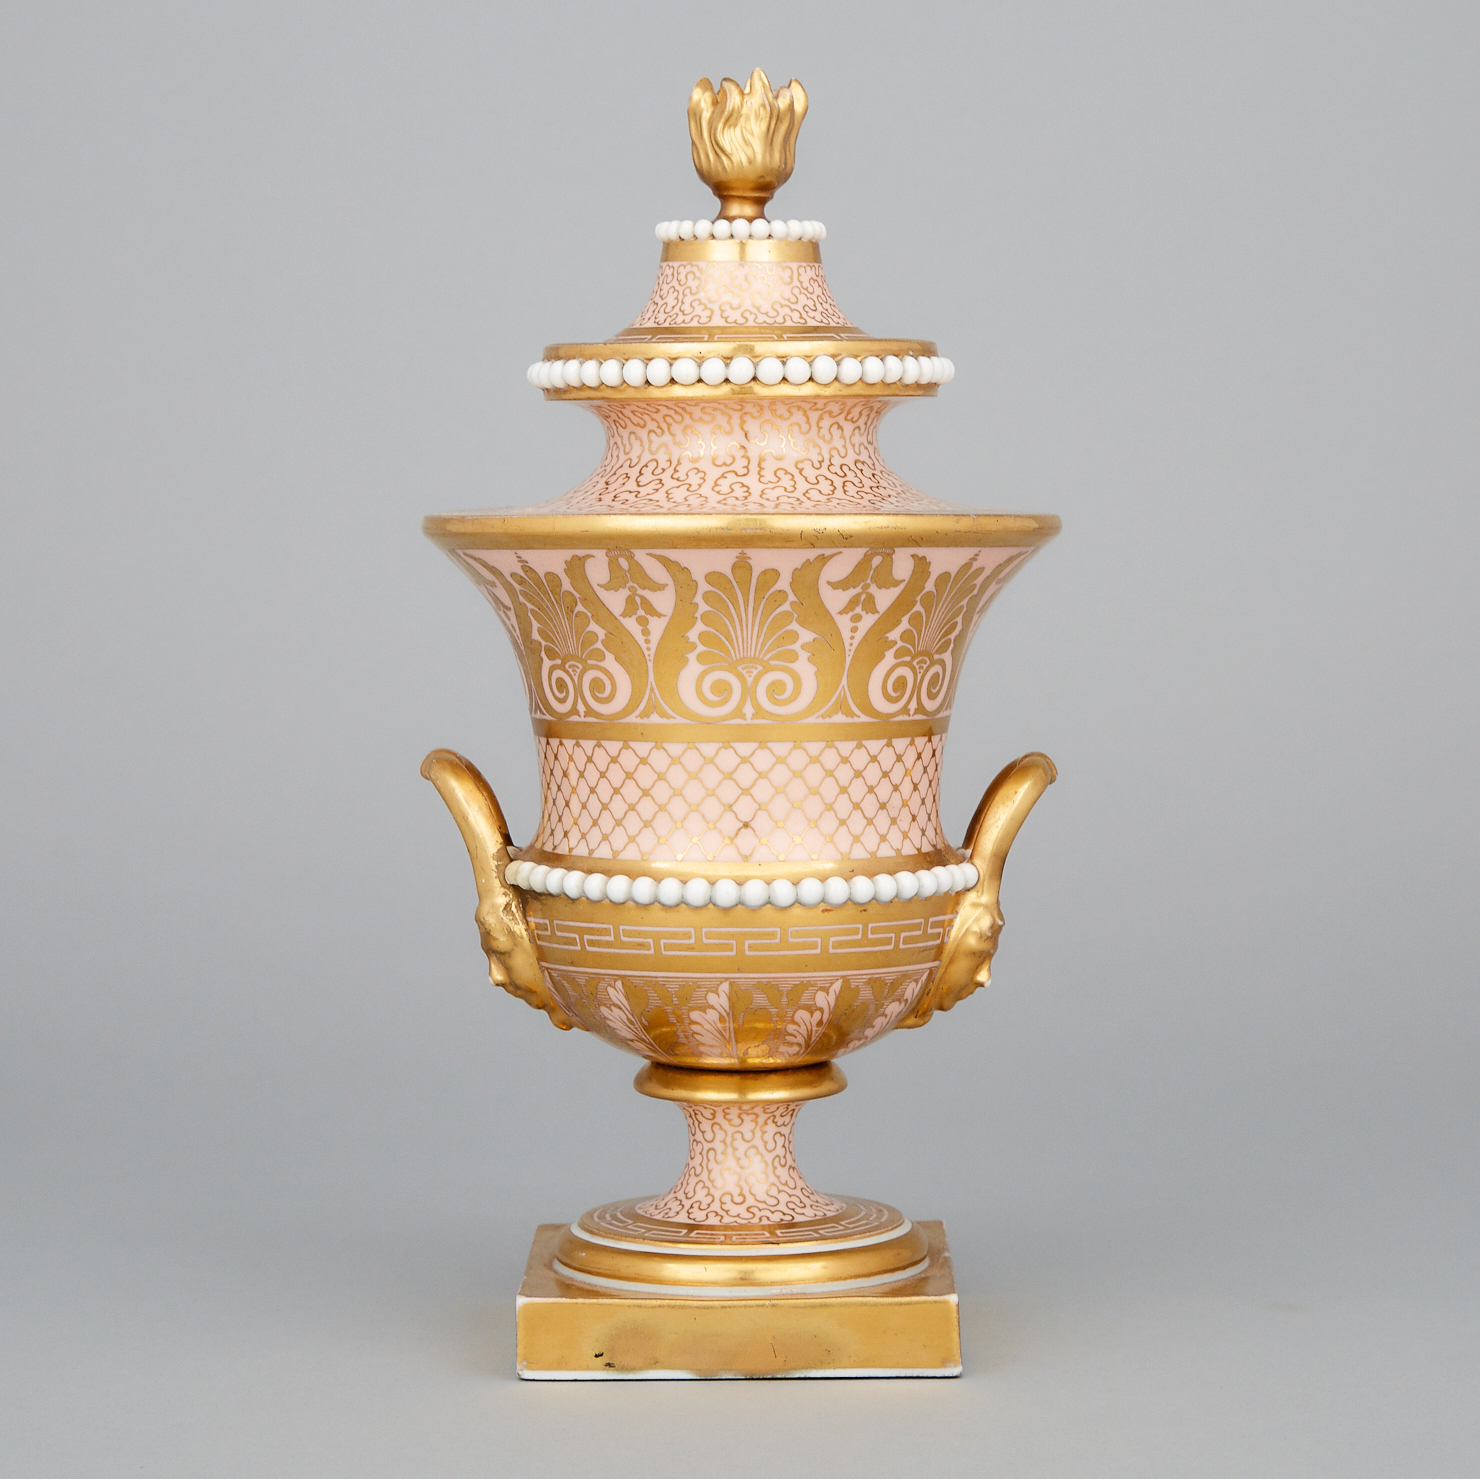 Barr, Flight & Barr Worcester Apricot and Gilt Ground Two-Handled Vase and Cover, c.1810